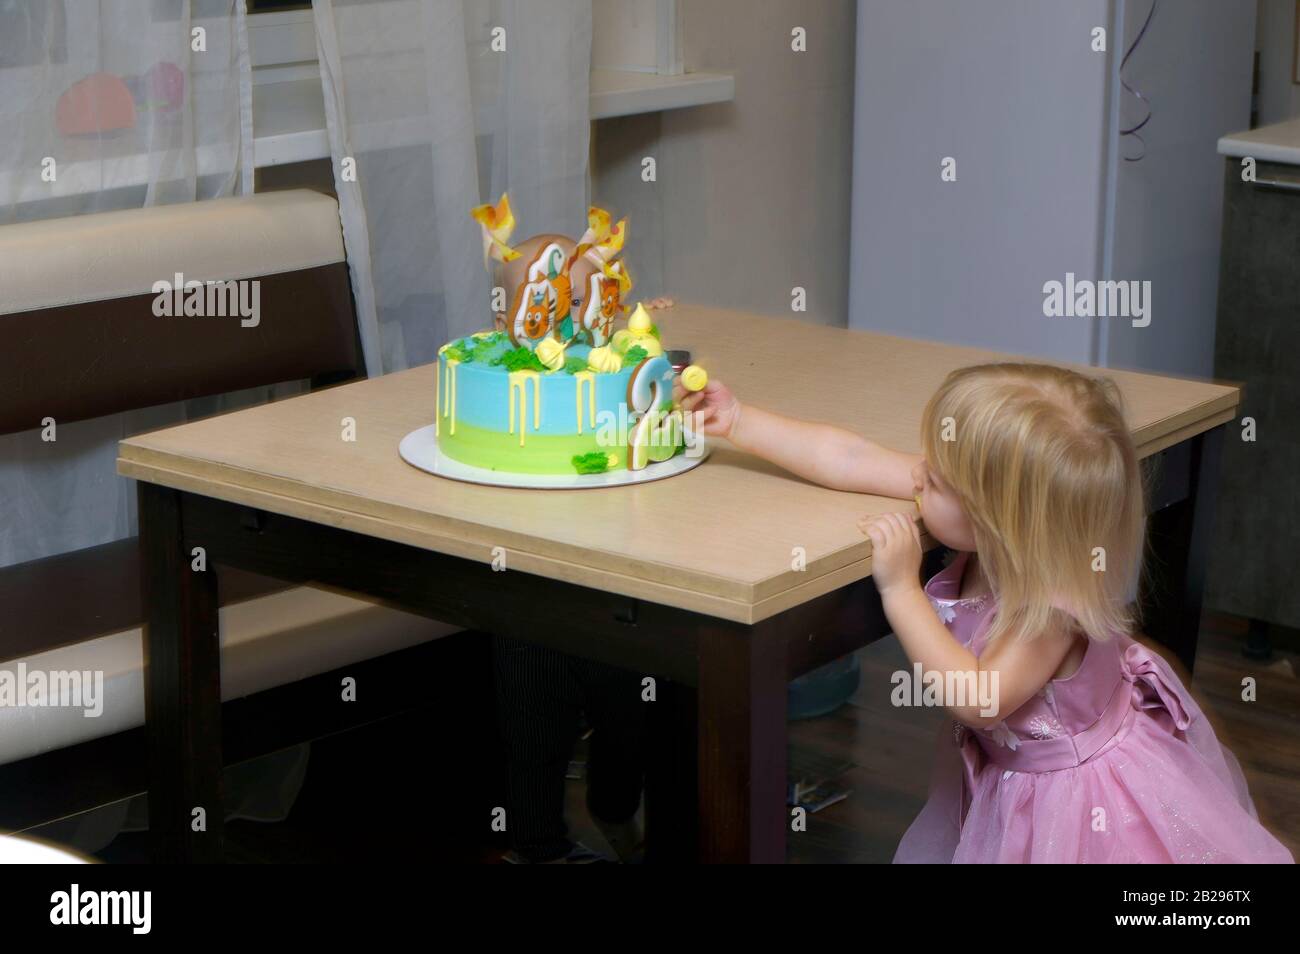 girl pulls her hand to the cake standing on the table for her birthday Stock Photo